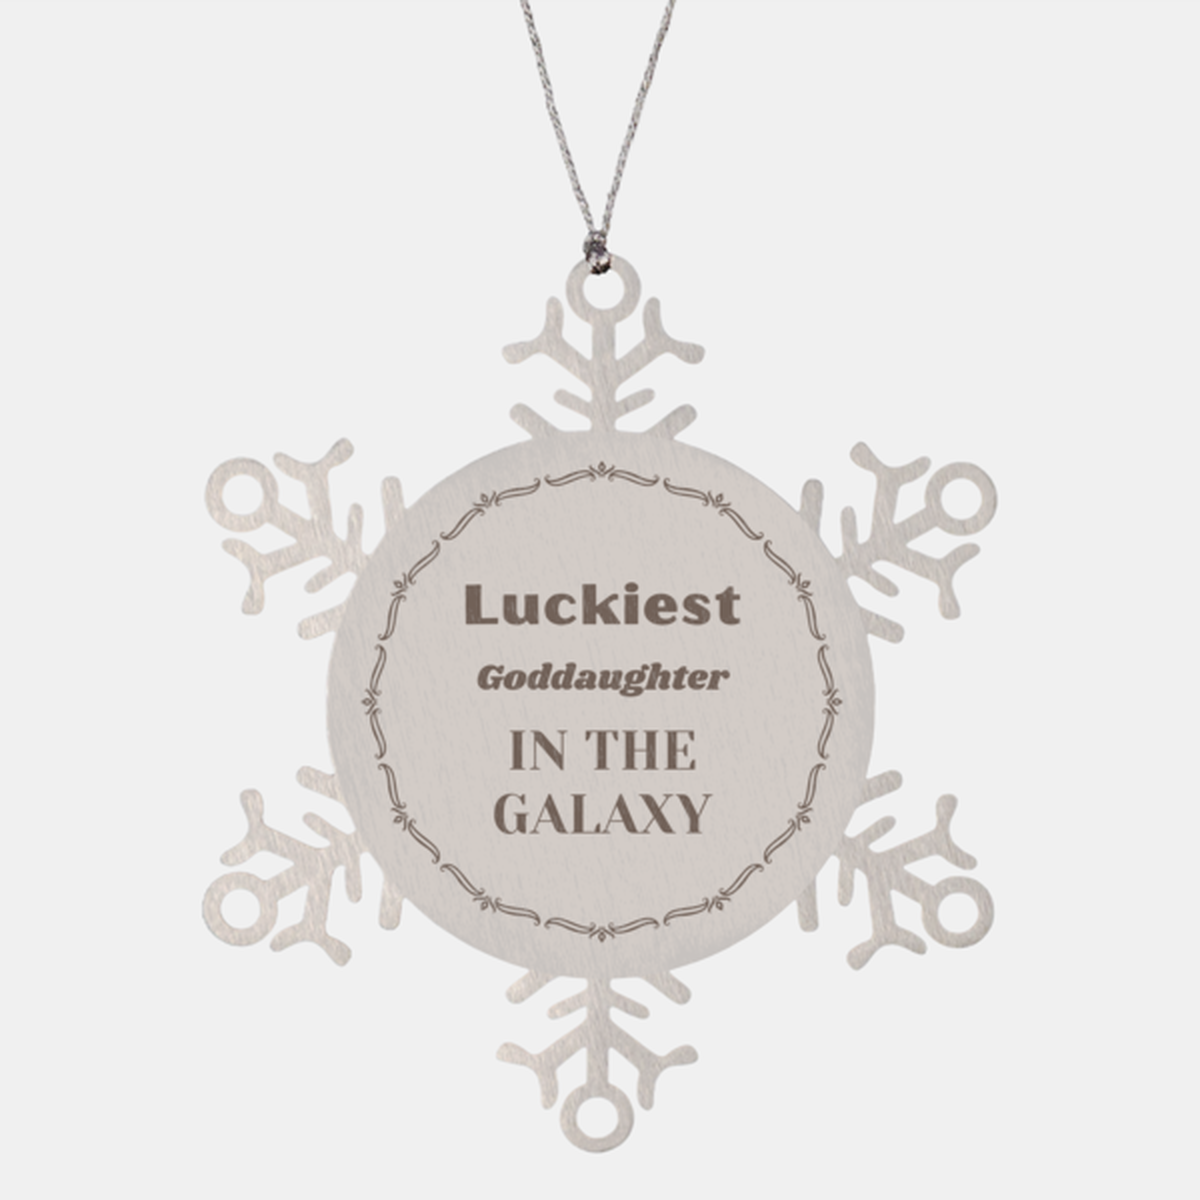 Luckiest Goddaughter in the Galaxy, To My Goddaughter Ornament Gifts, Christmas Goddaughter Snowflake Ornament Gifts, X-mas Decorations Unique Gifts For Goddaughter Men Women